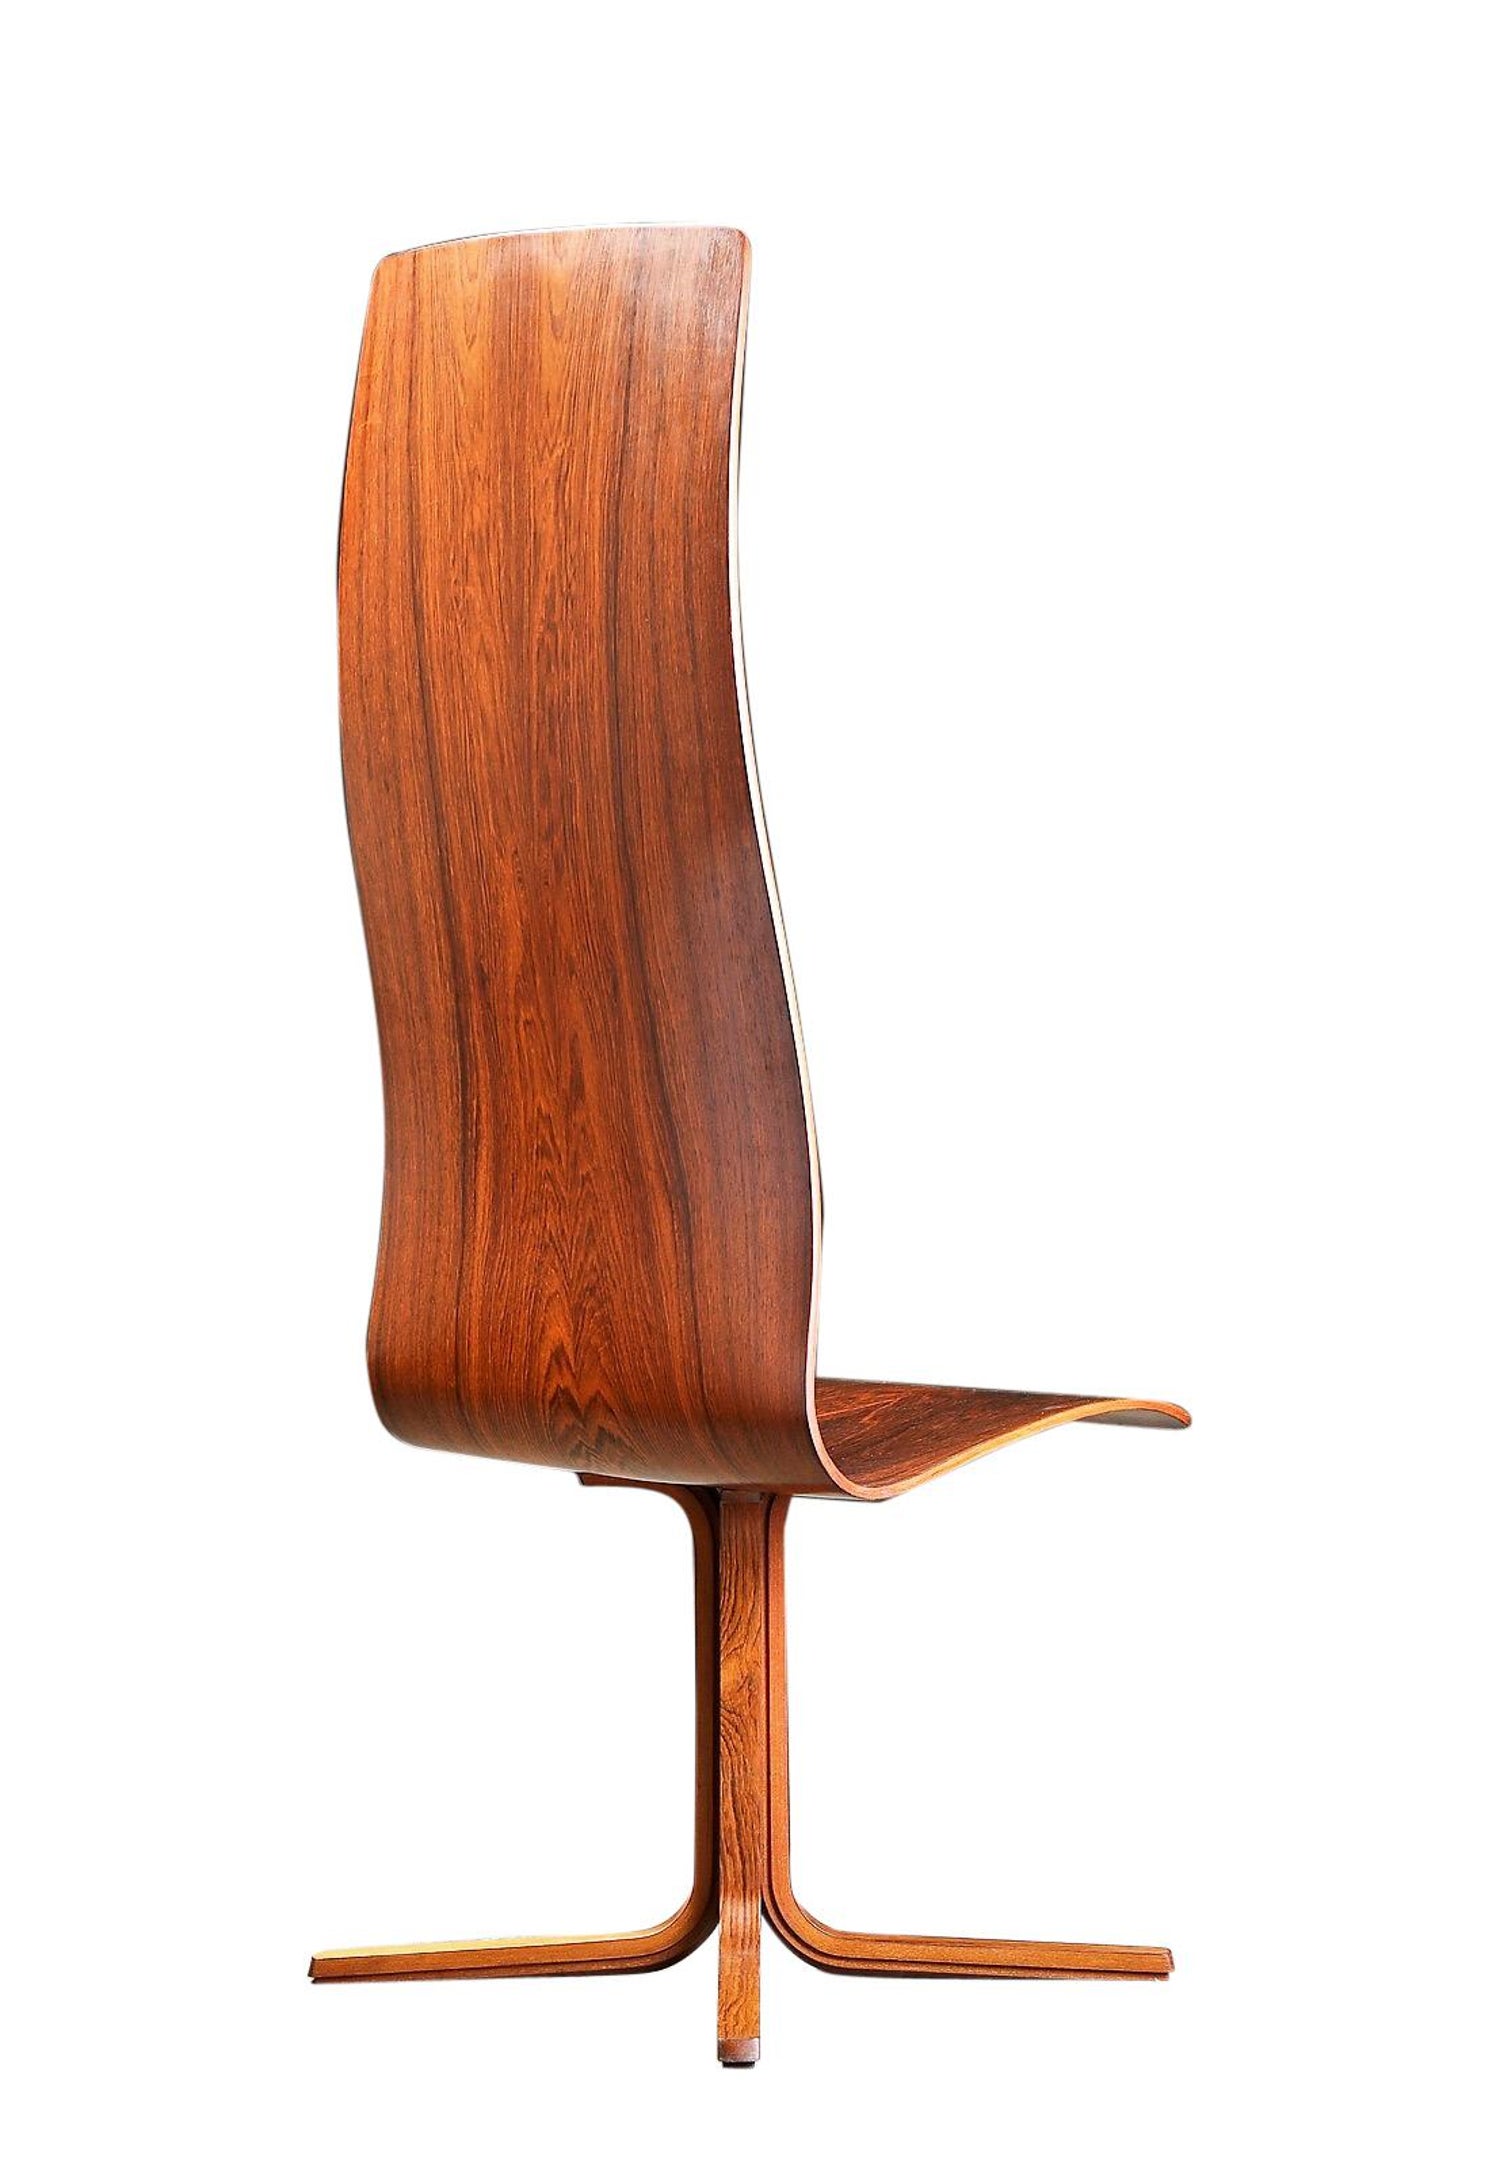 Arne Jacobsen High-Backed 'Oxford' Chair in Rosewood, 1965 at 1stDibs